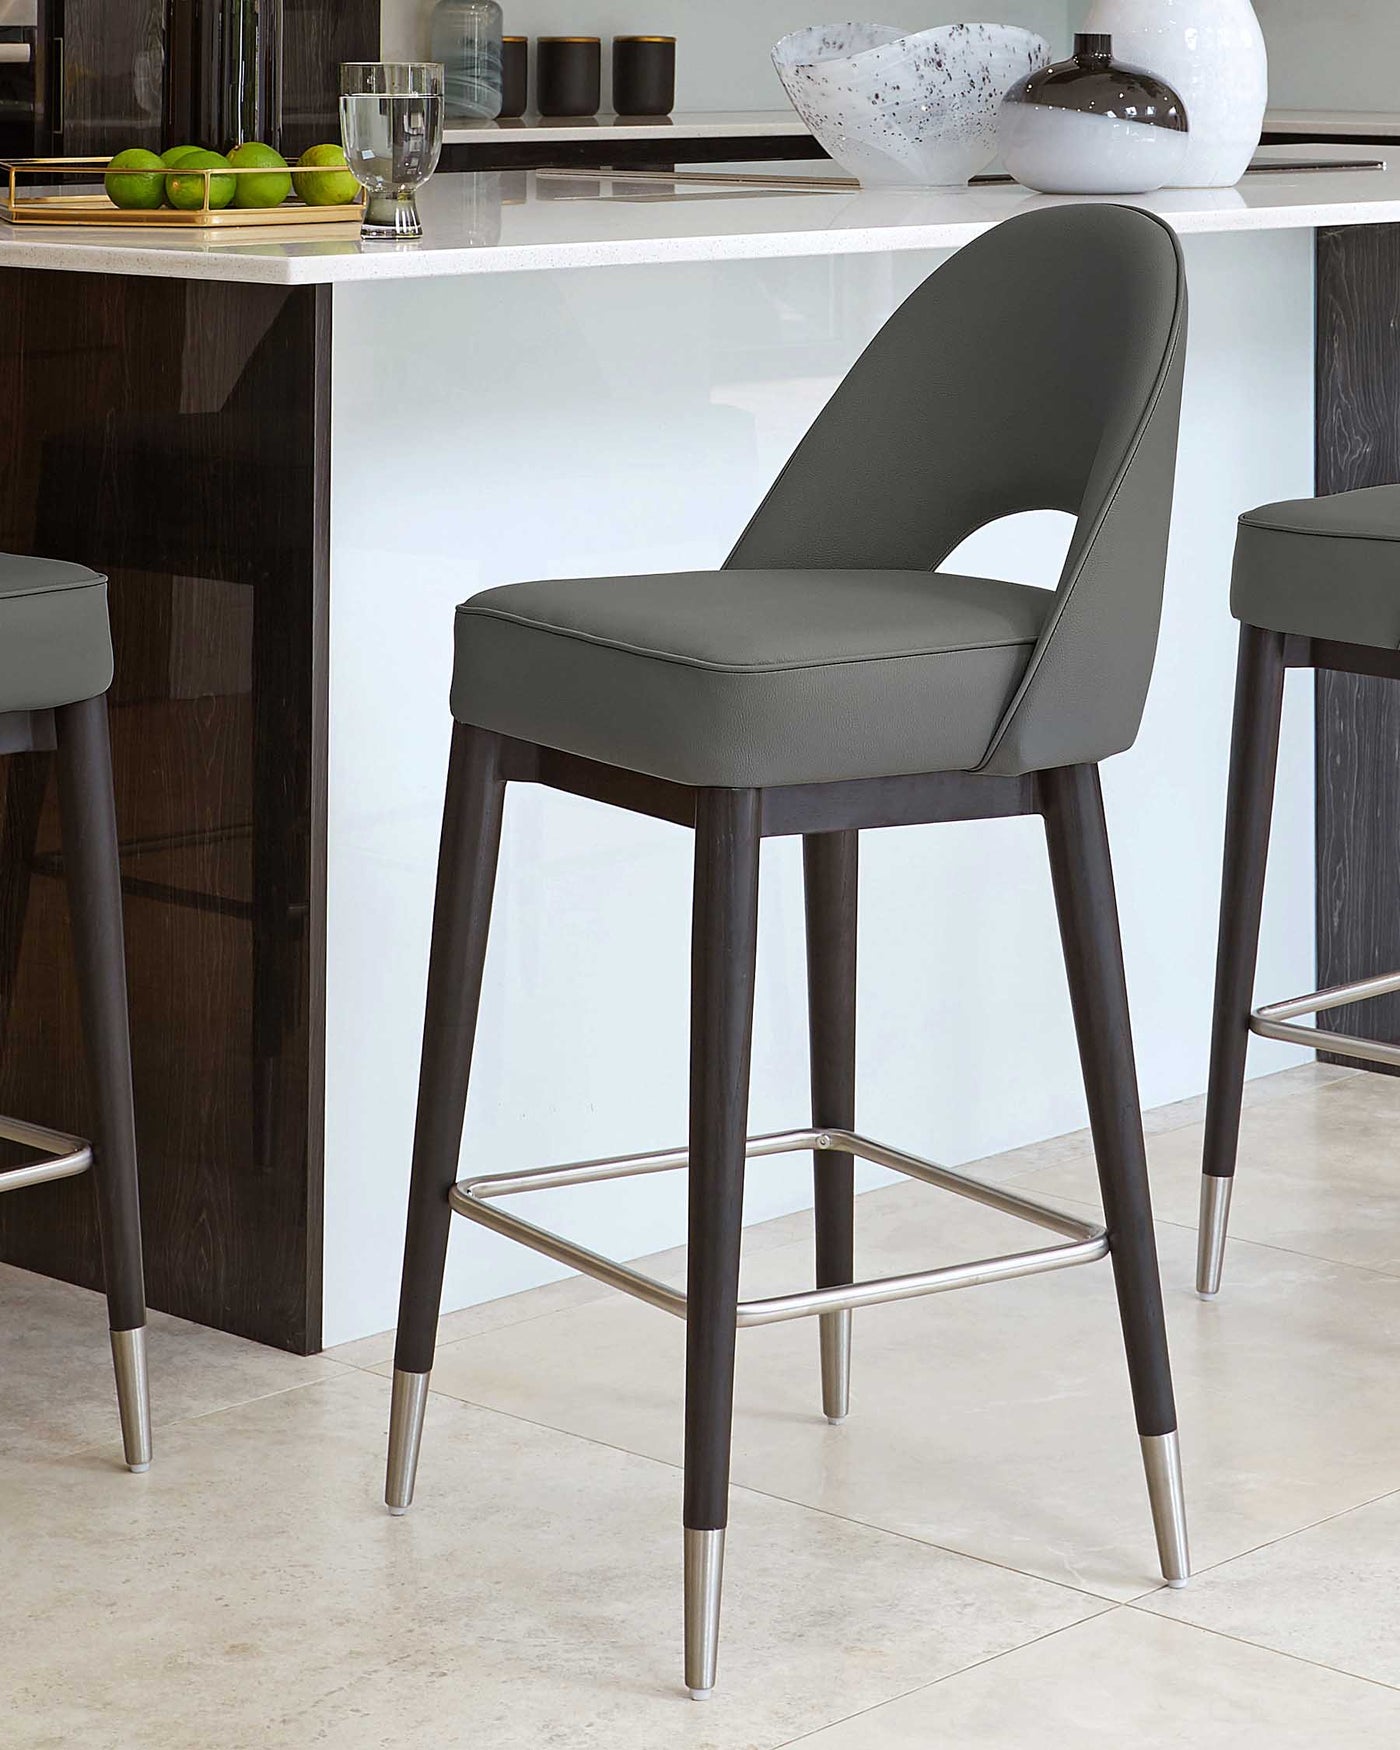 Modern charcoal grey bar stool with sleek curves, a rounded seat back, and slim, angled wood legs tipped with metallic accents, featuring a footrest for comfort.